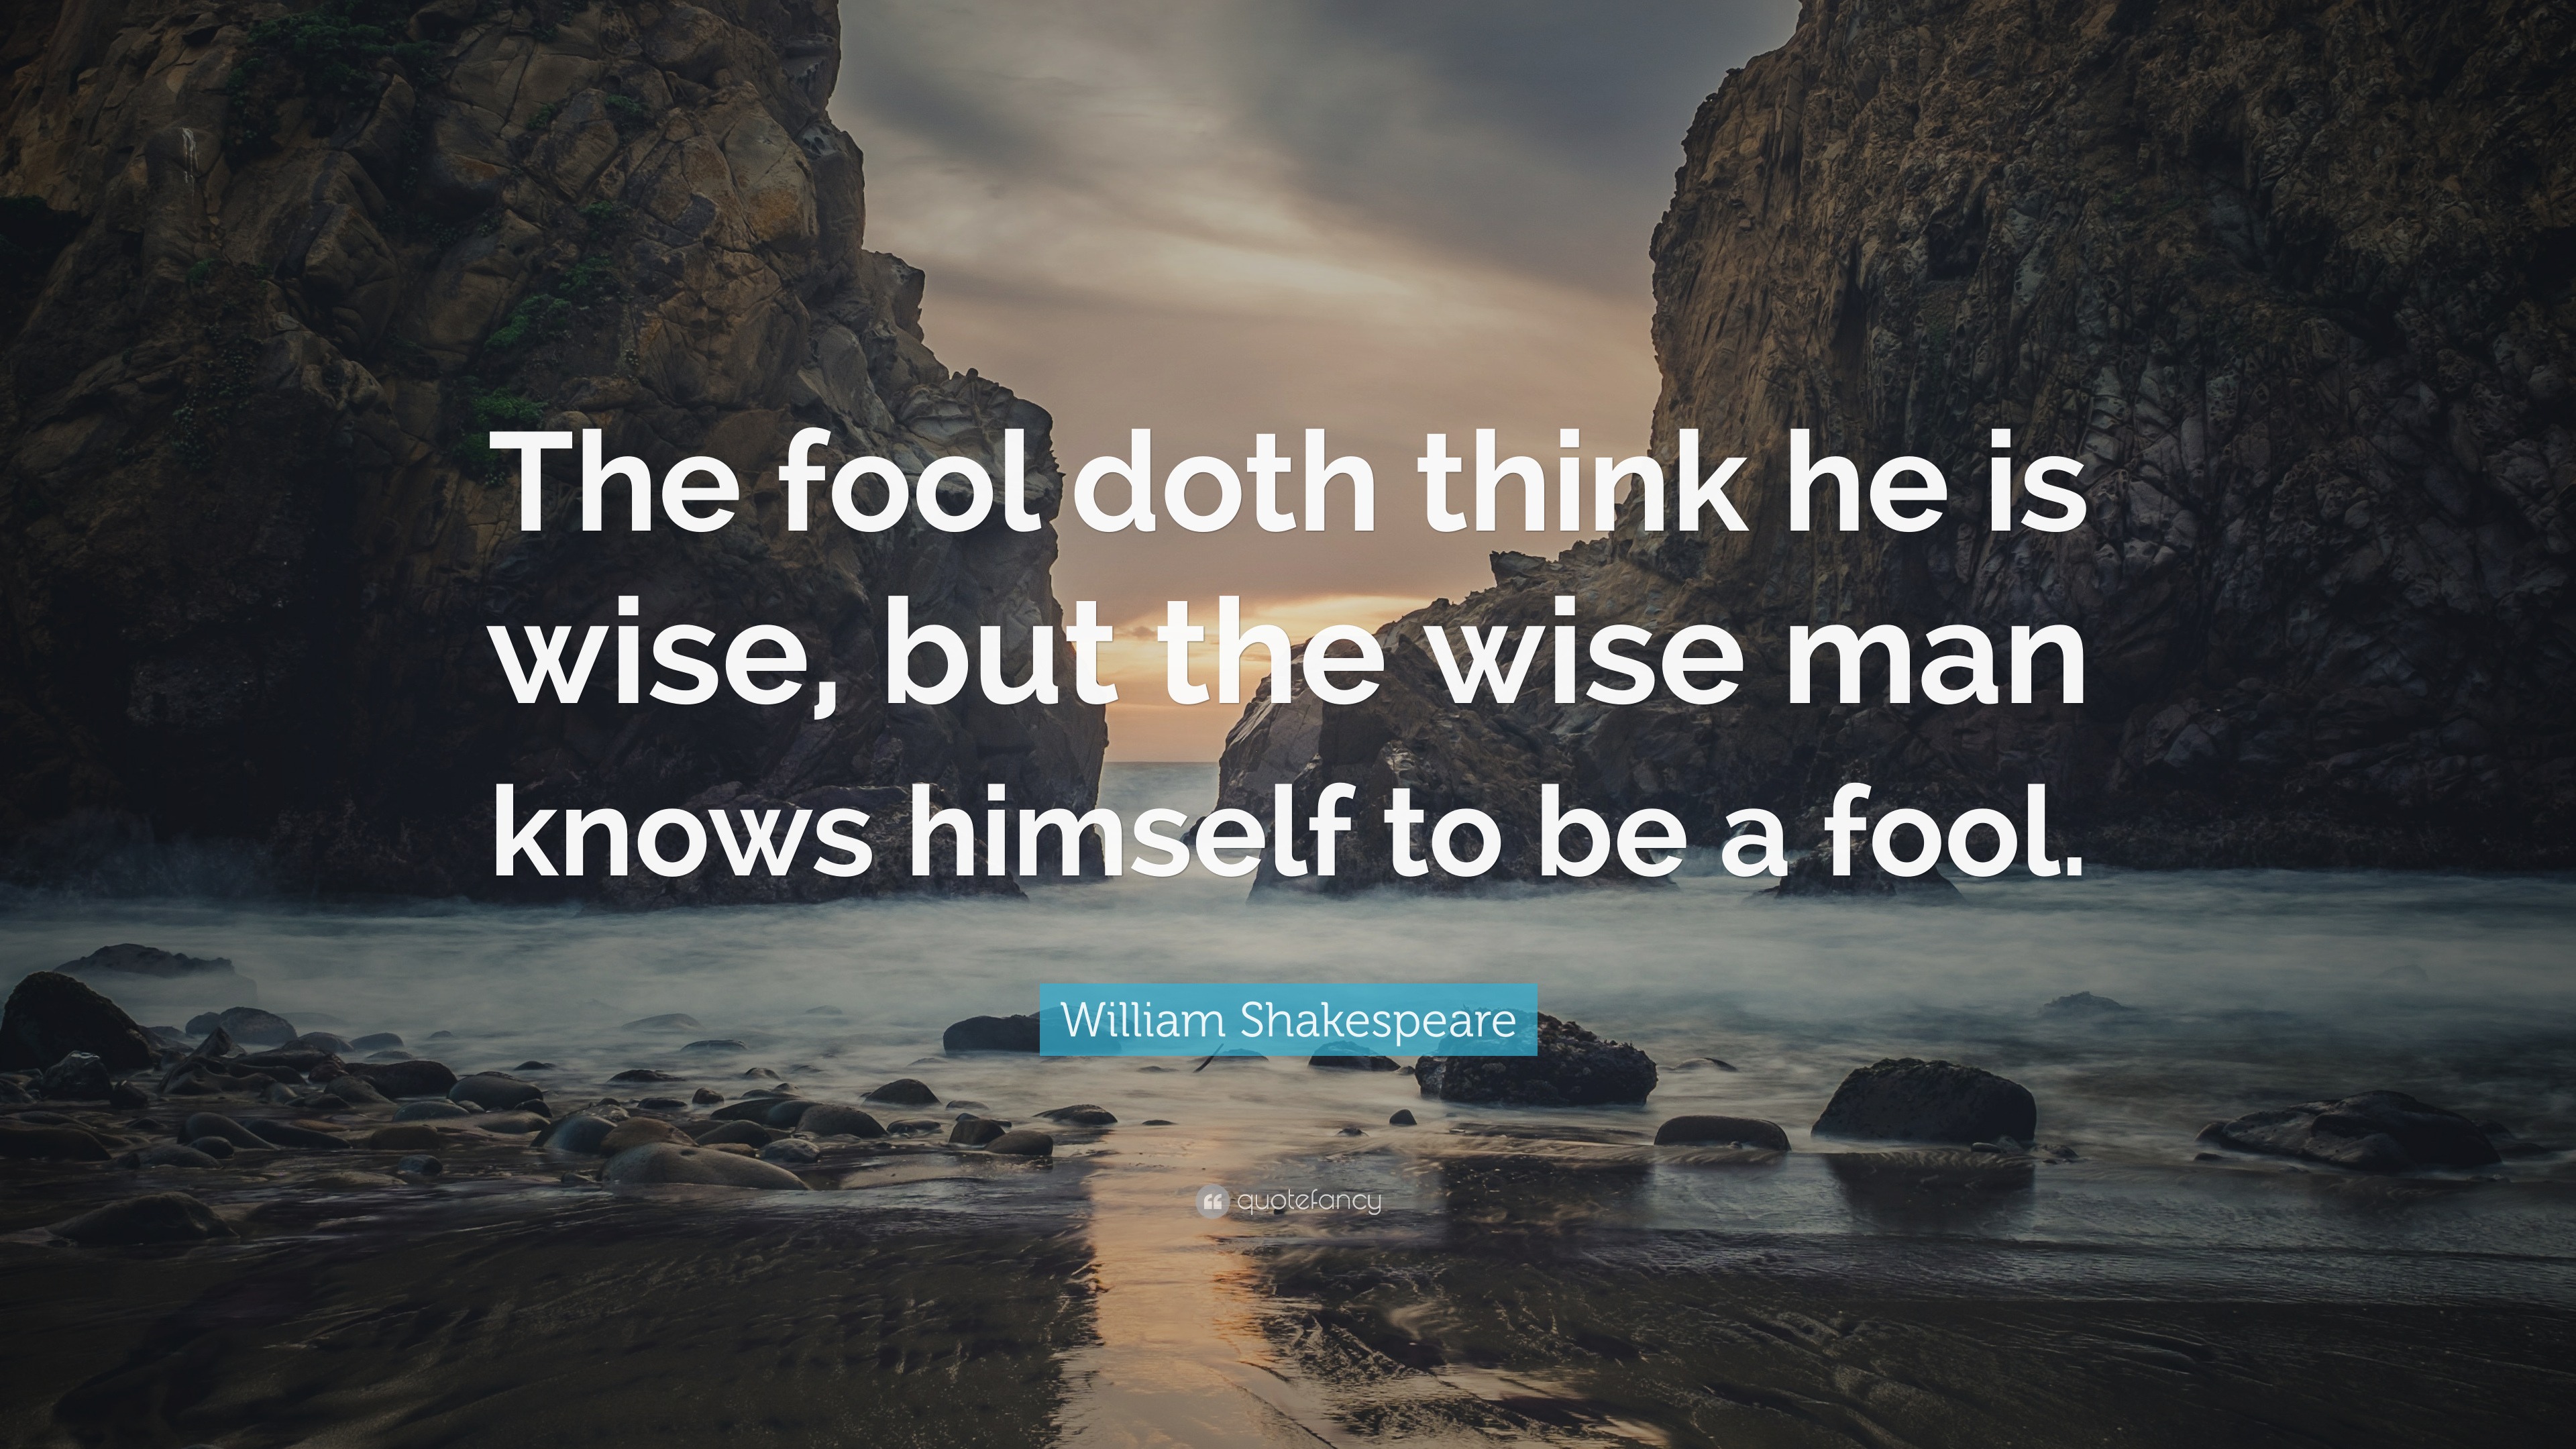 William Shakespeare Quote: "The fool doth think he is wise ...